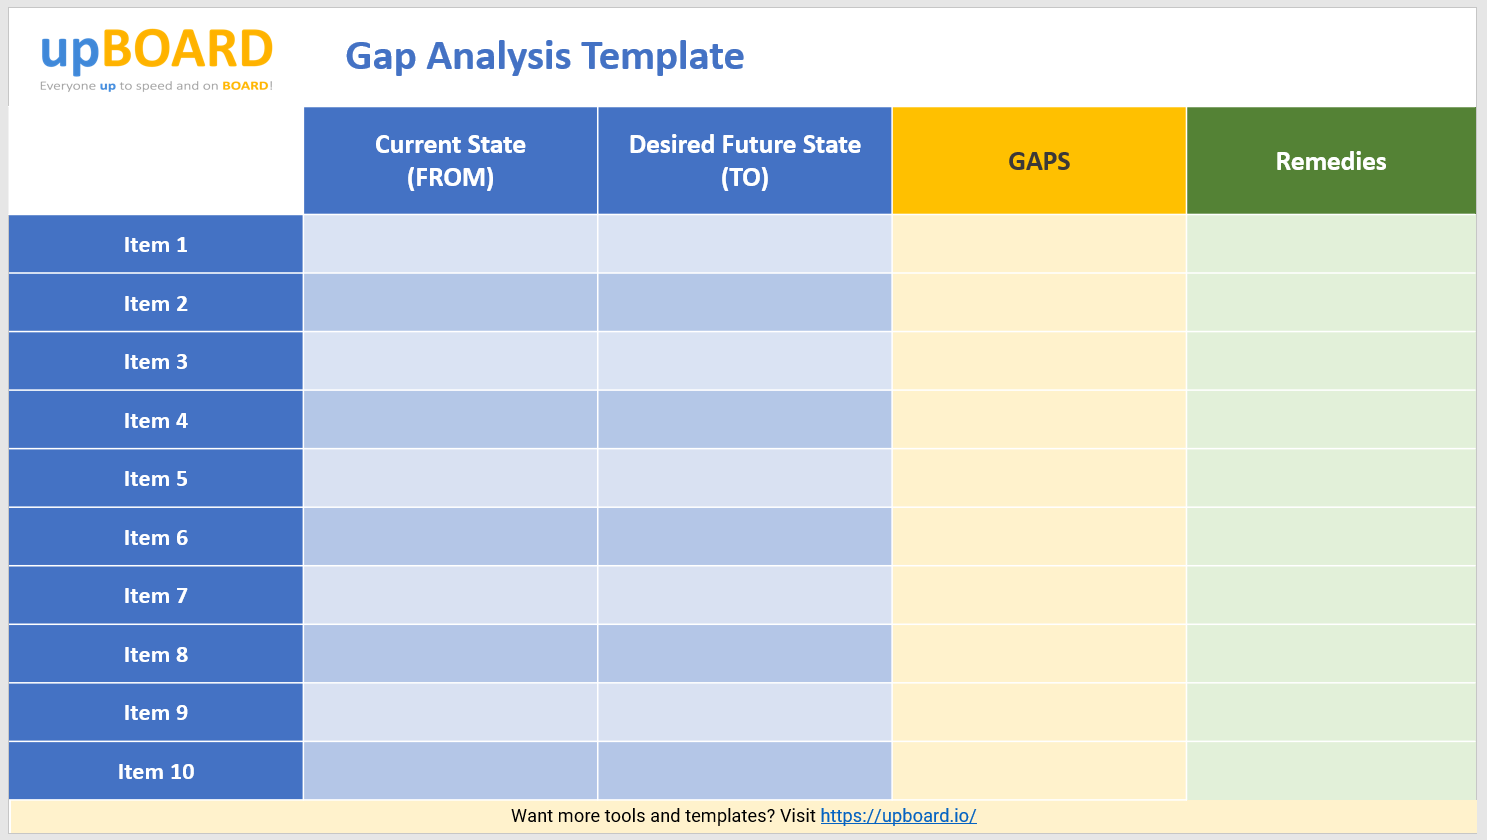 how to perform a gap analysis